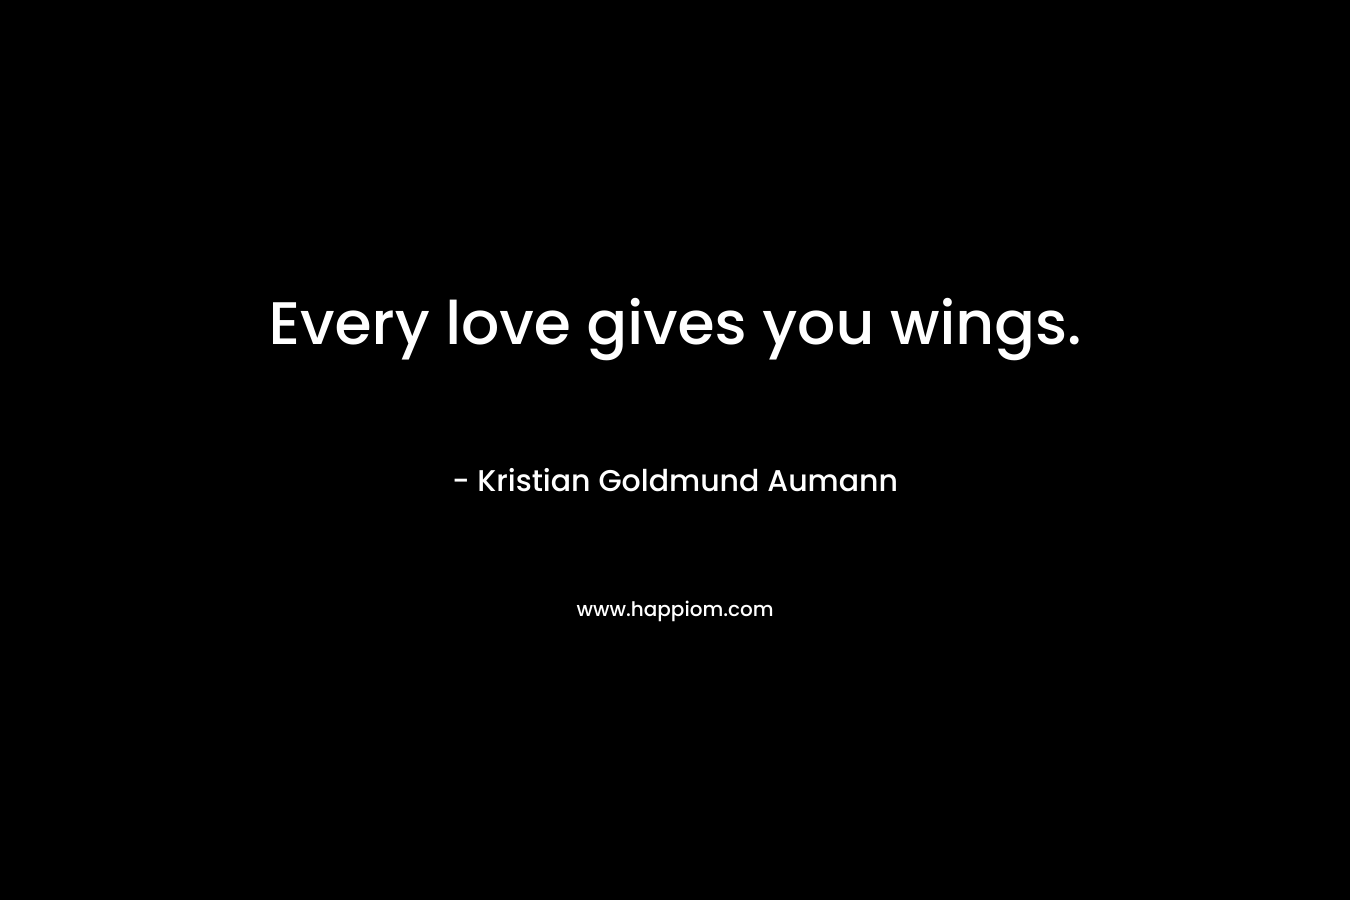 Every love gives you wings.